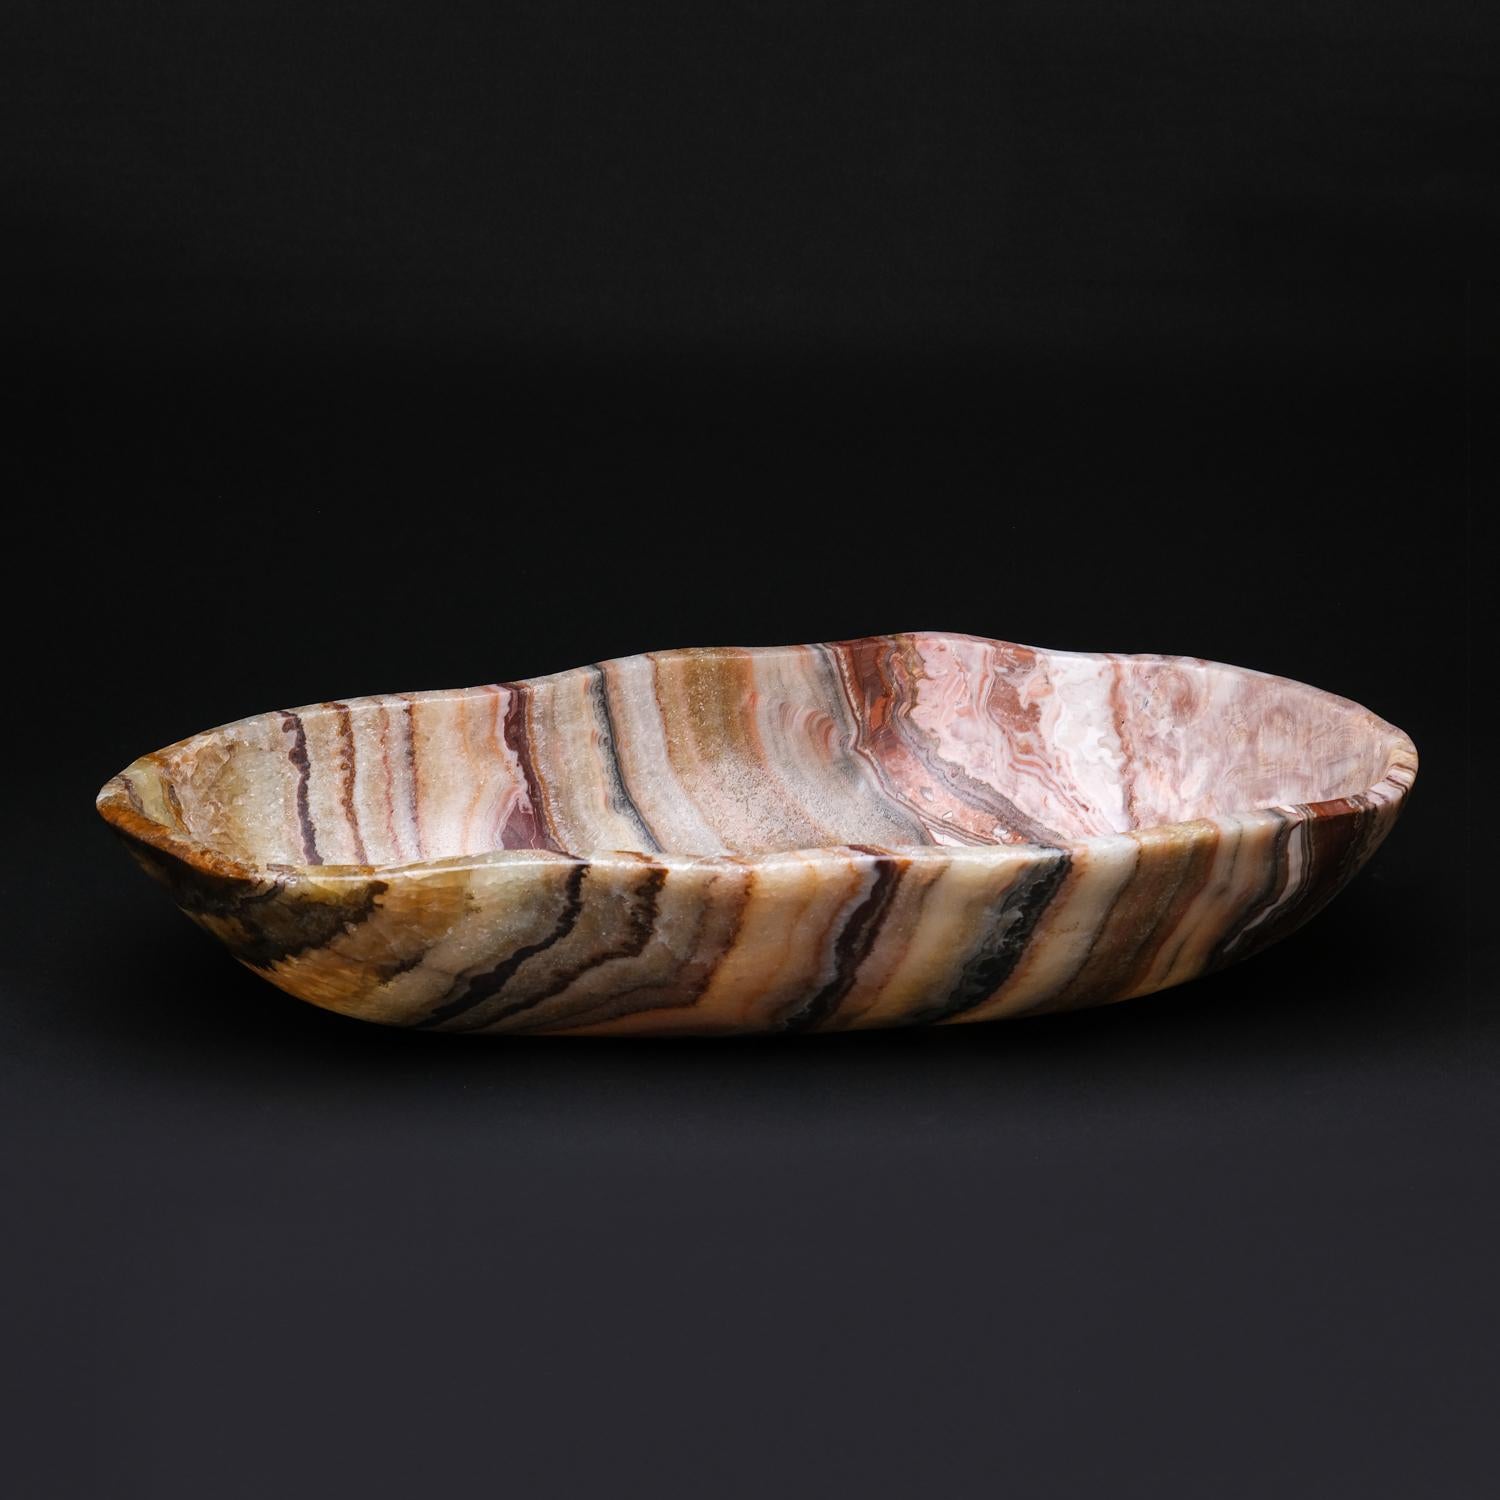 Contemporary Large Polished Rainbow Onyx Canoe Bowl from Mexico (19.2 lbs) For Sale